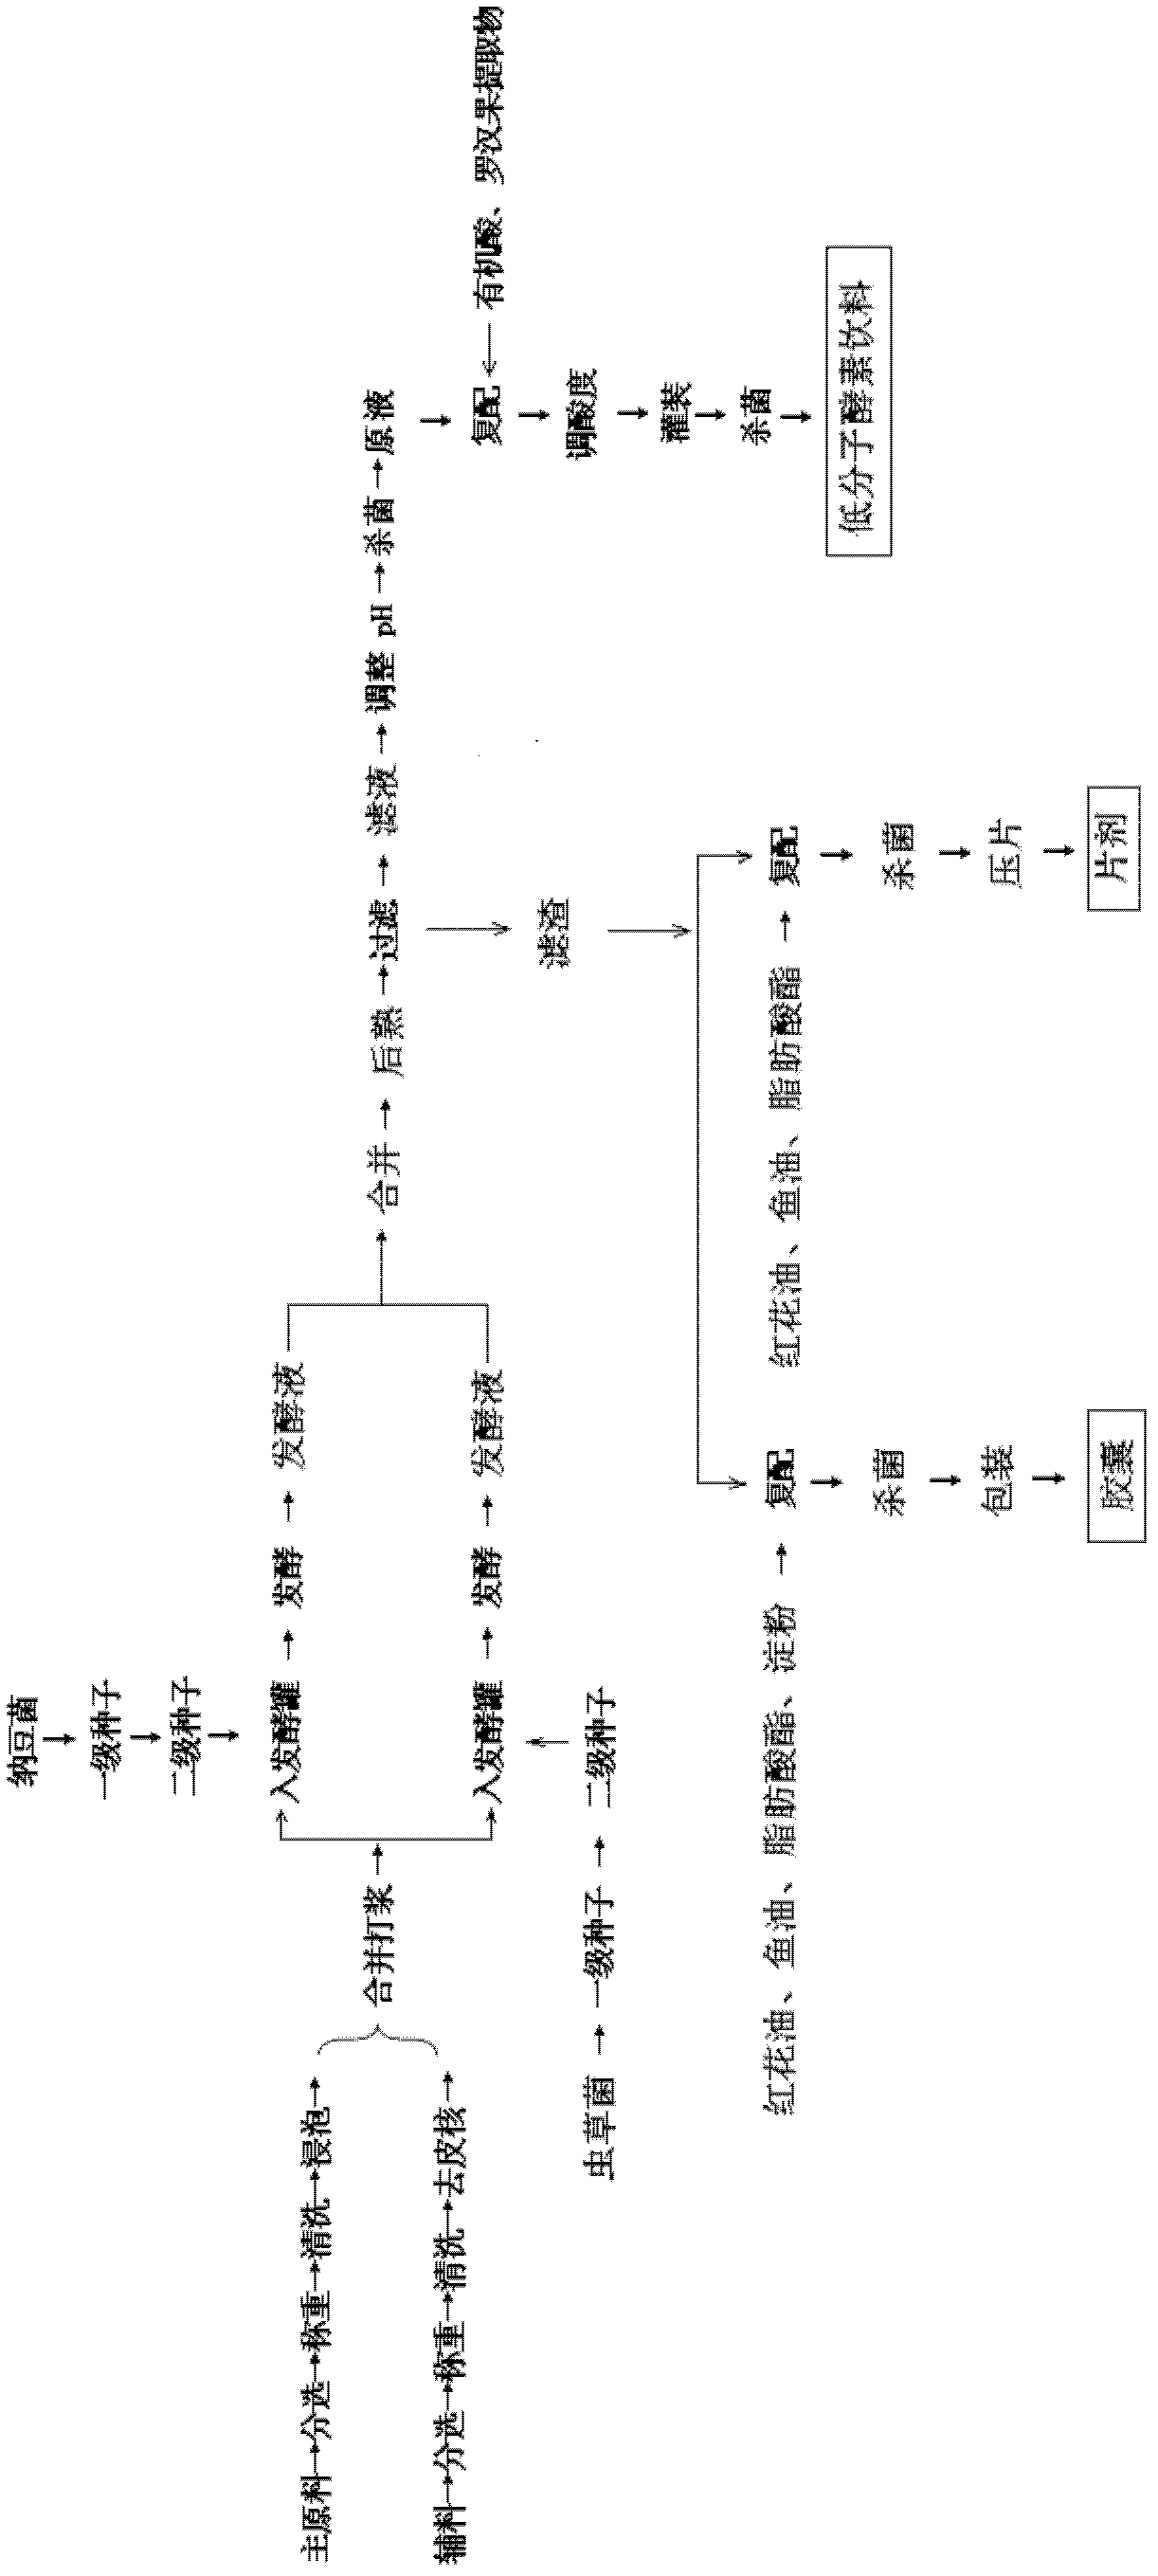 Production method for bacillus natto and cordyceps fungus composite enzyme series of products